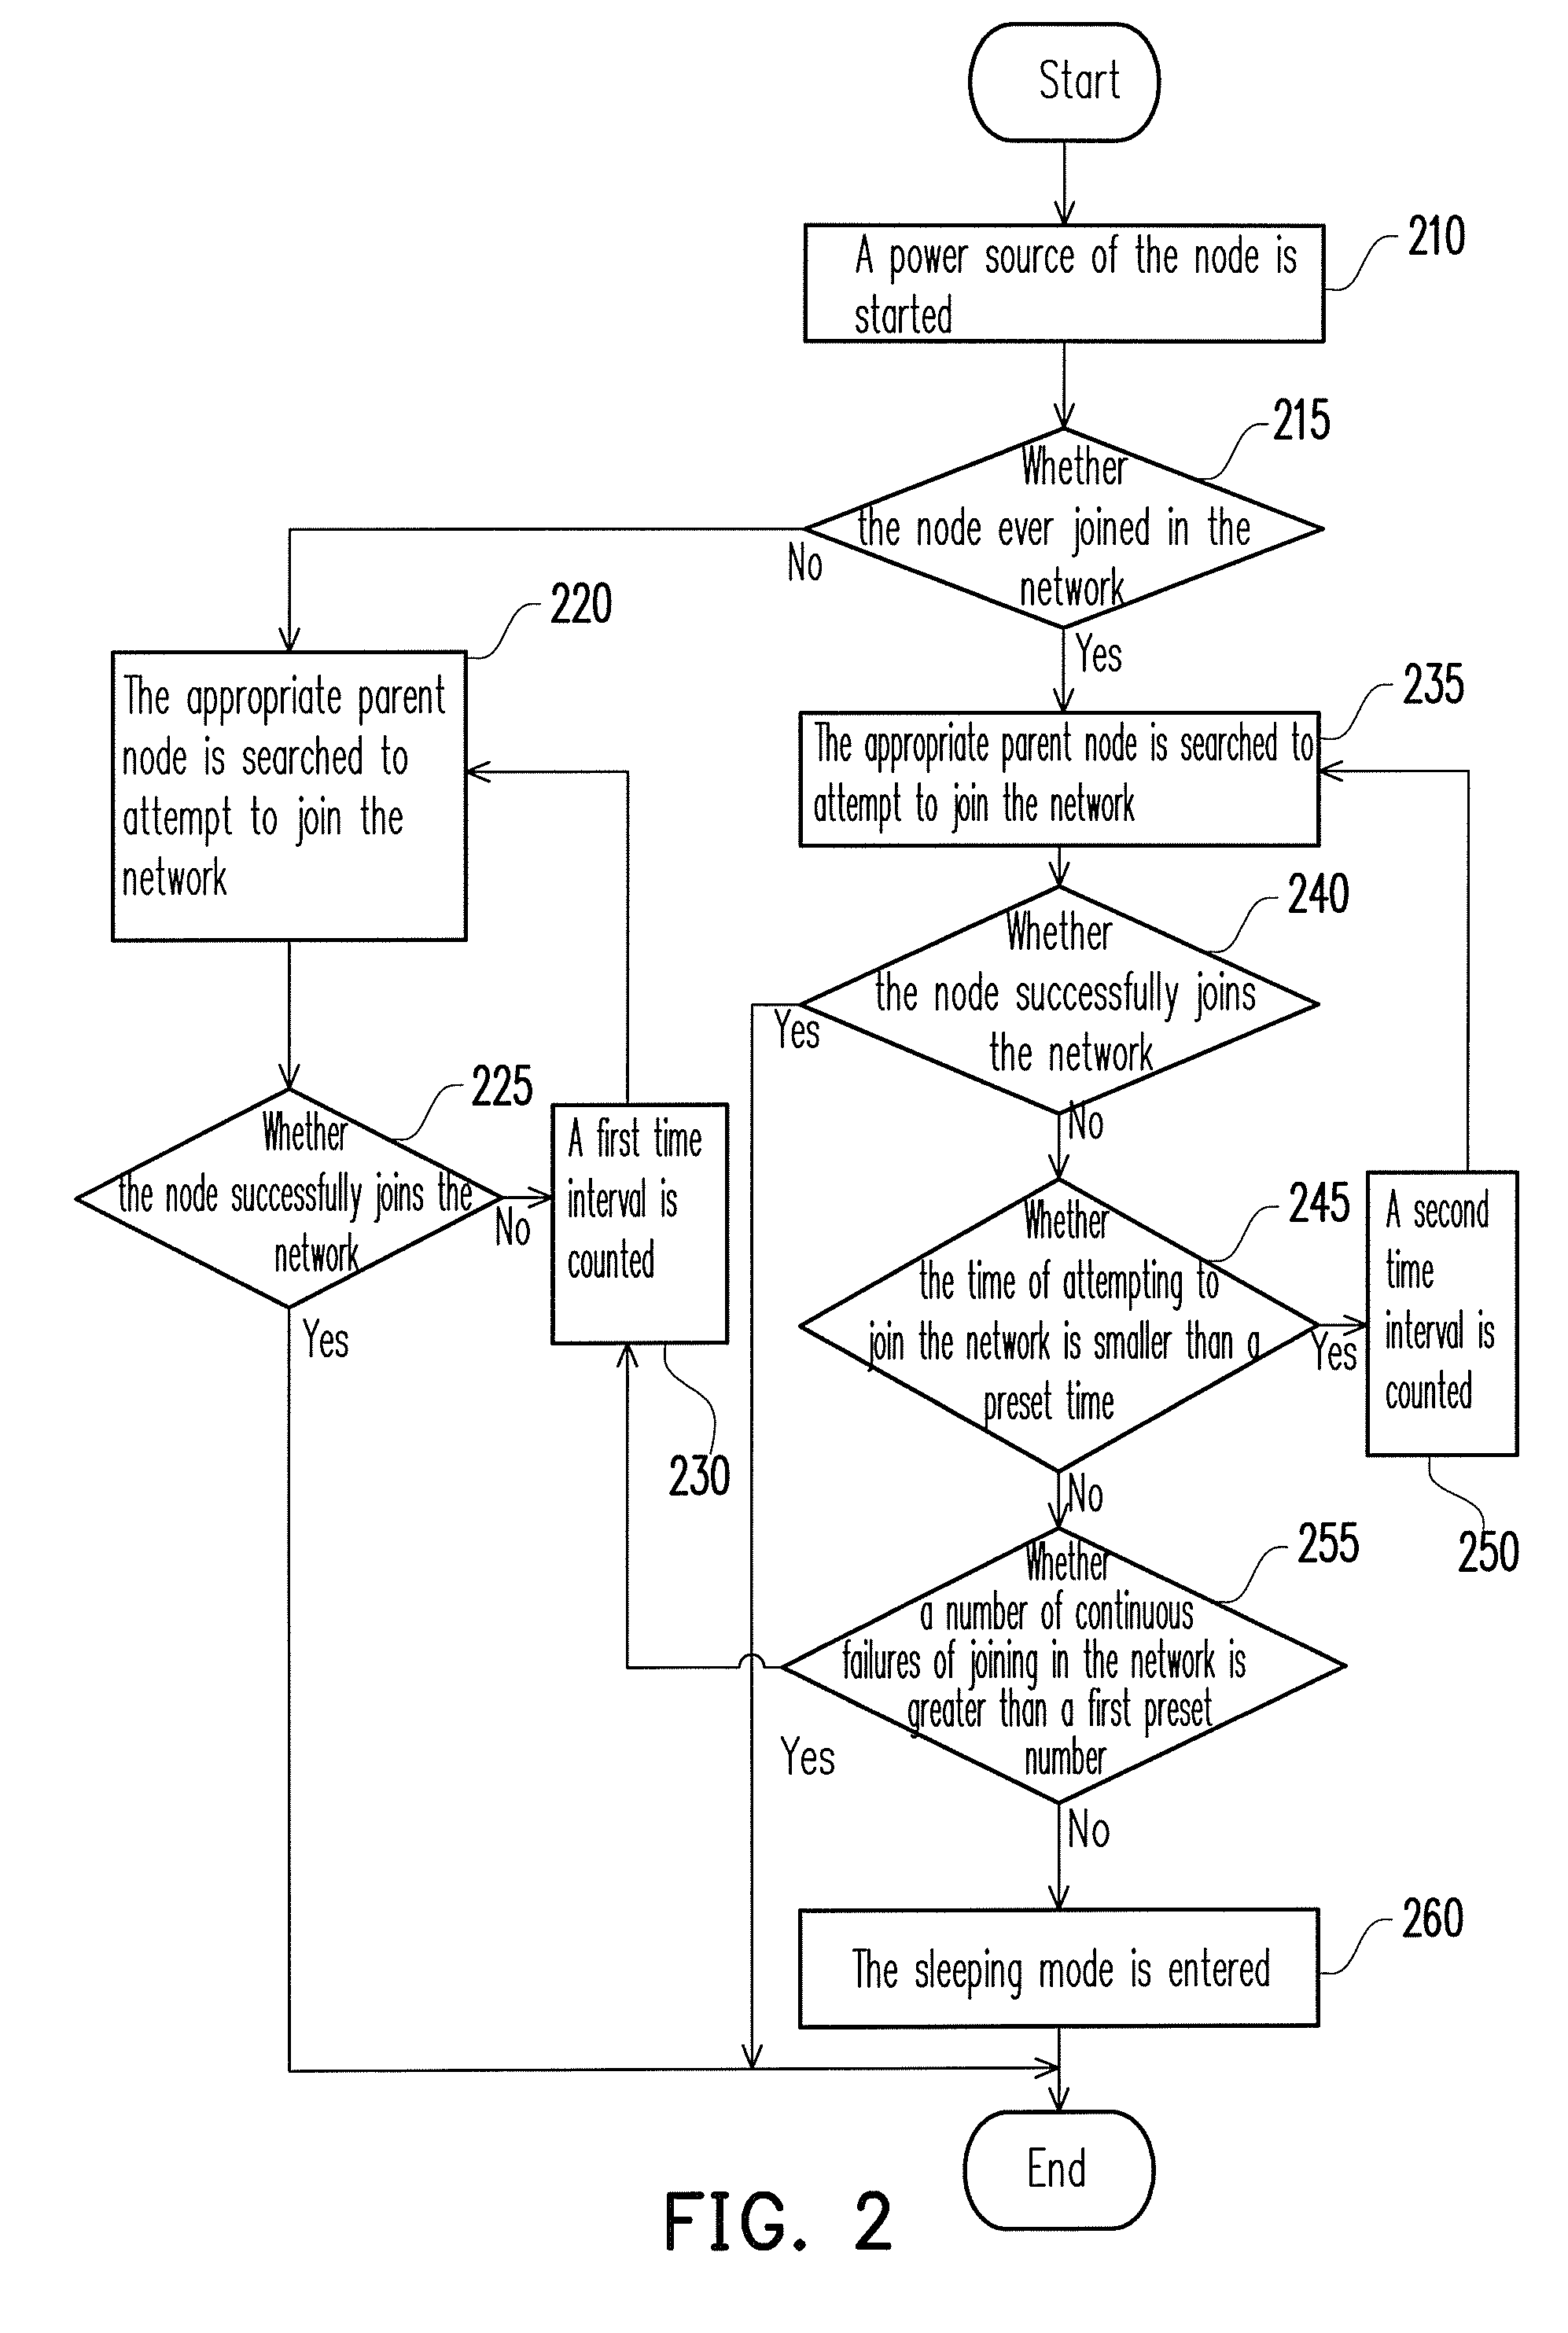 Method and system for network synchronization